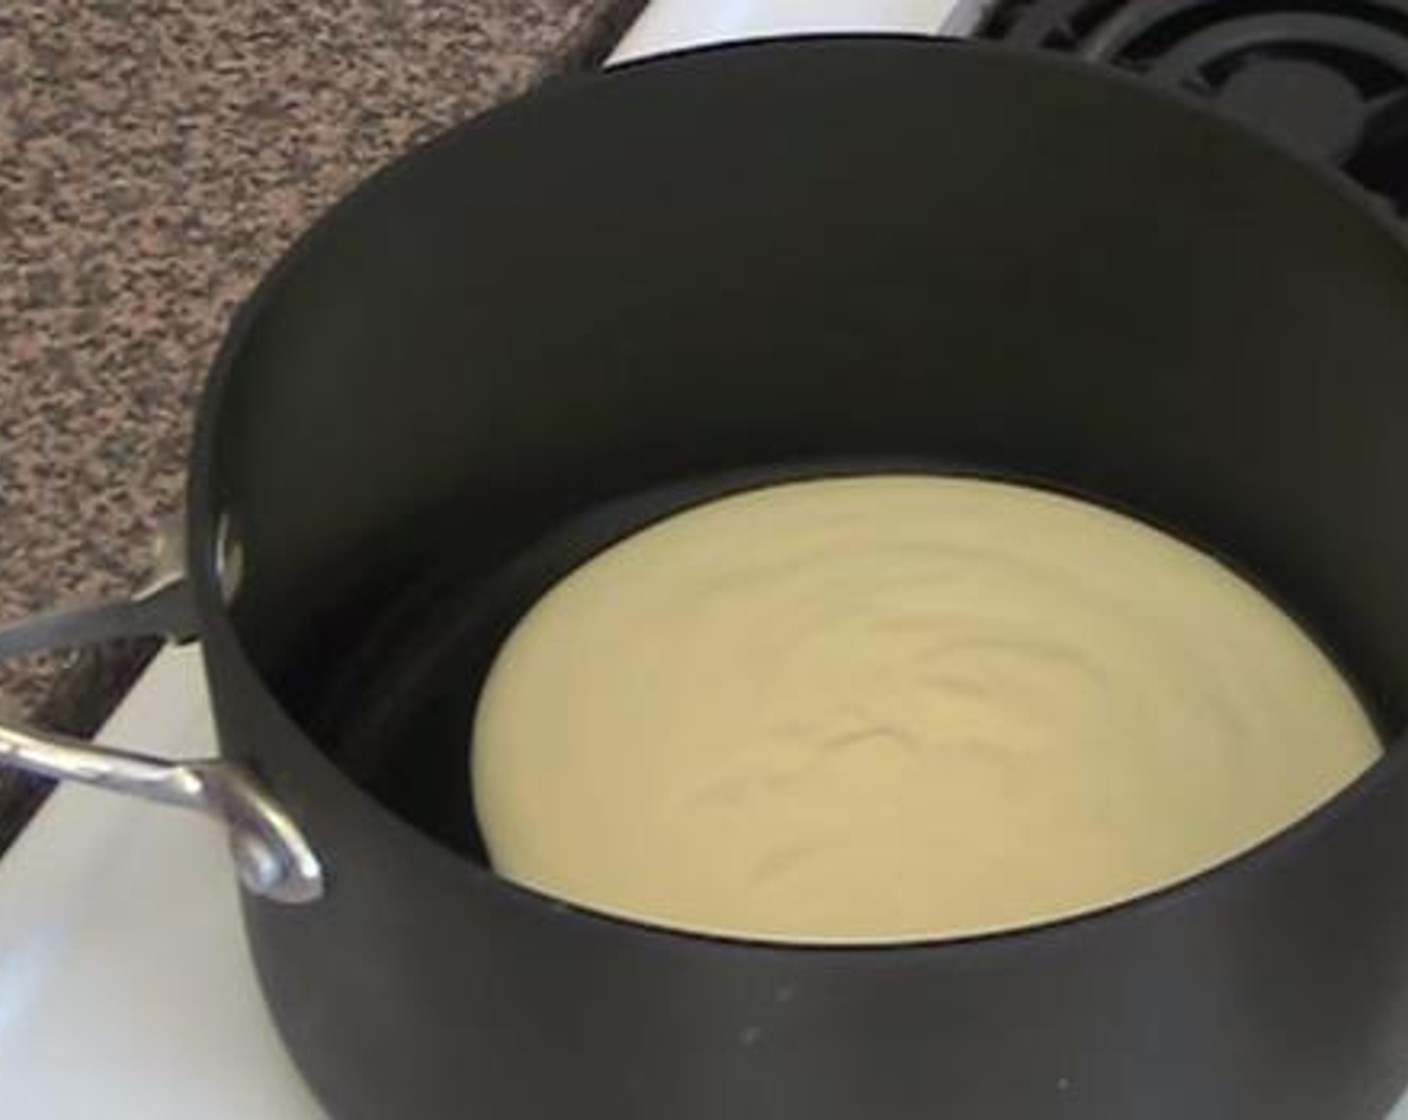 step 2 Into a sauce pan, bring the Thickened Cream (2/3 cup) to the boil. Once it starts boiling, take it off the heat.